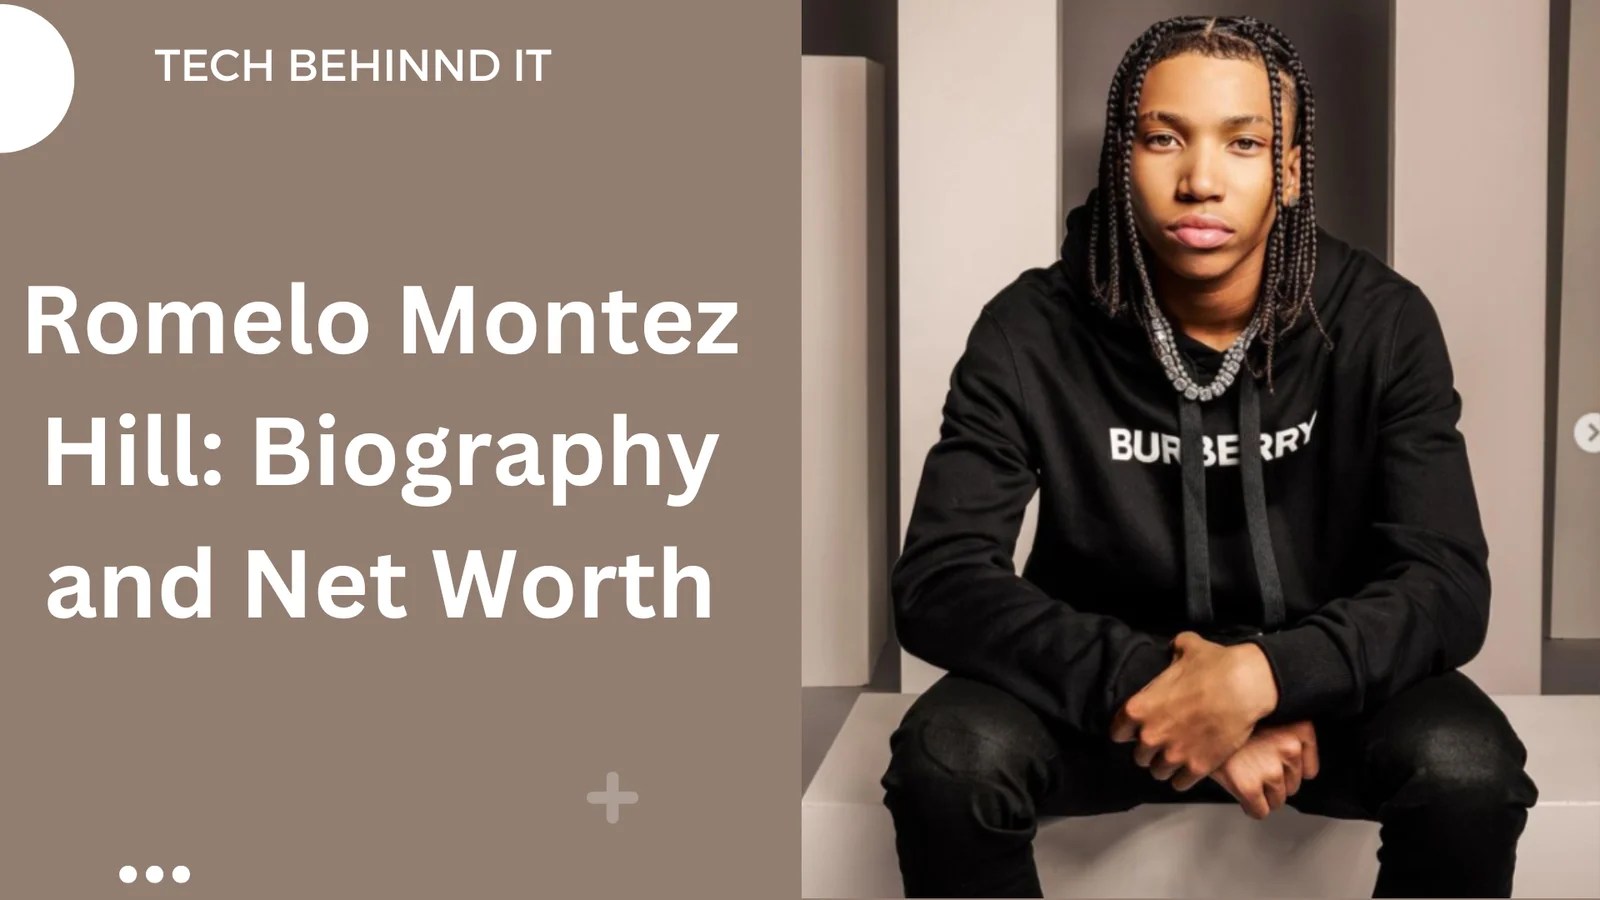 Romelo Montez Hill Biography and Net Worth Tech Behind It